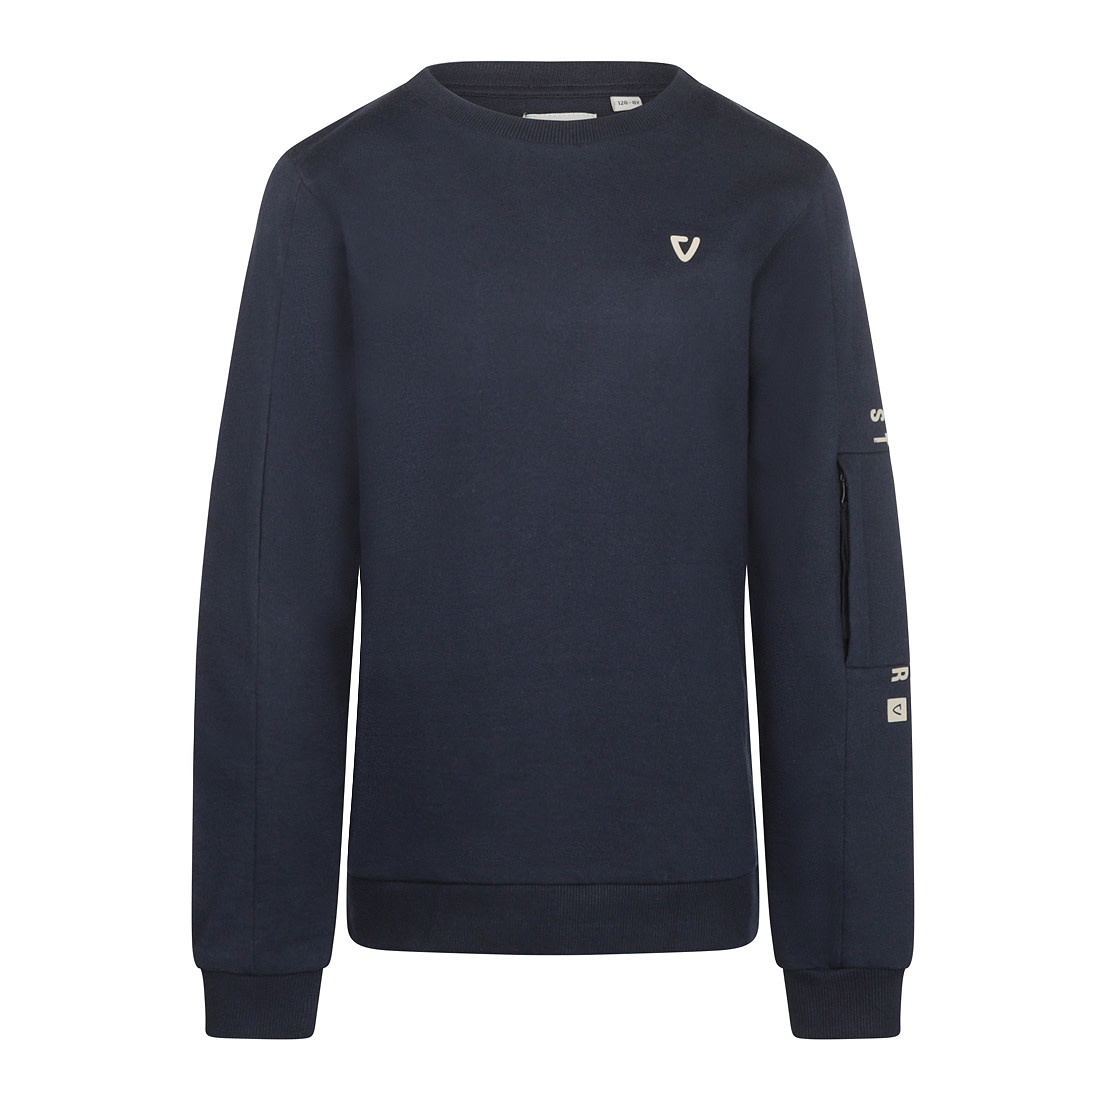 Lightweight Navy Sweater with Sleeve Pocket Detail